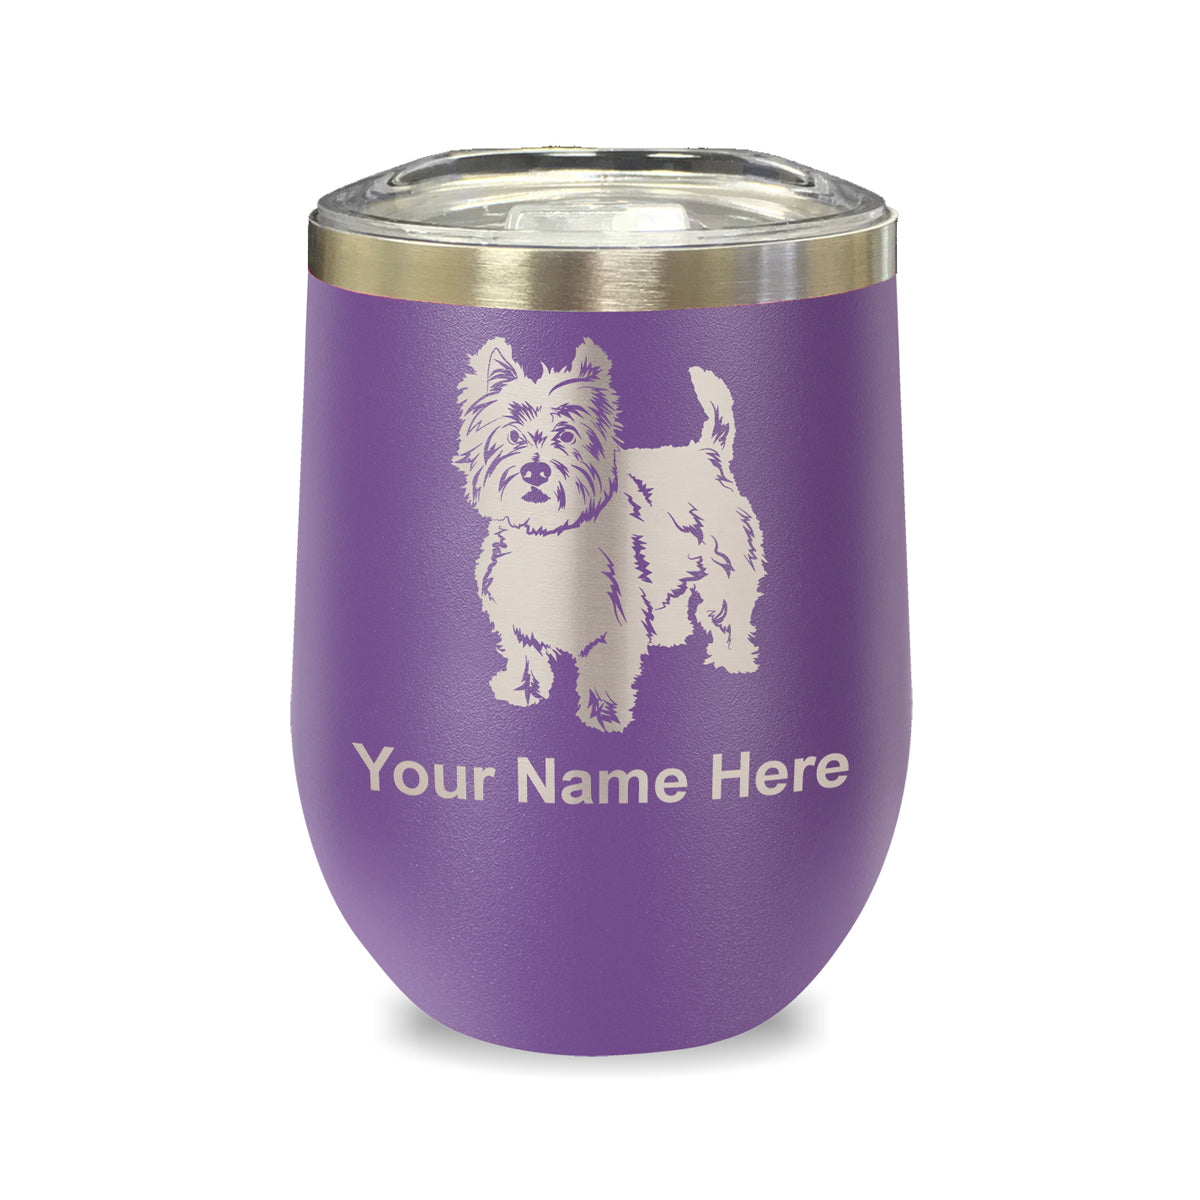 LaserGram Double Wall Stainless Steel Wine Glass, West Highland Terrier Dog, Personalized Engraving Included